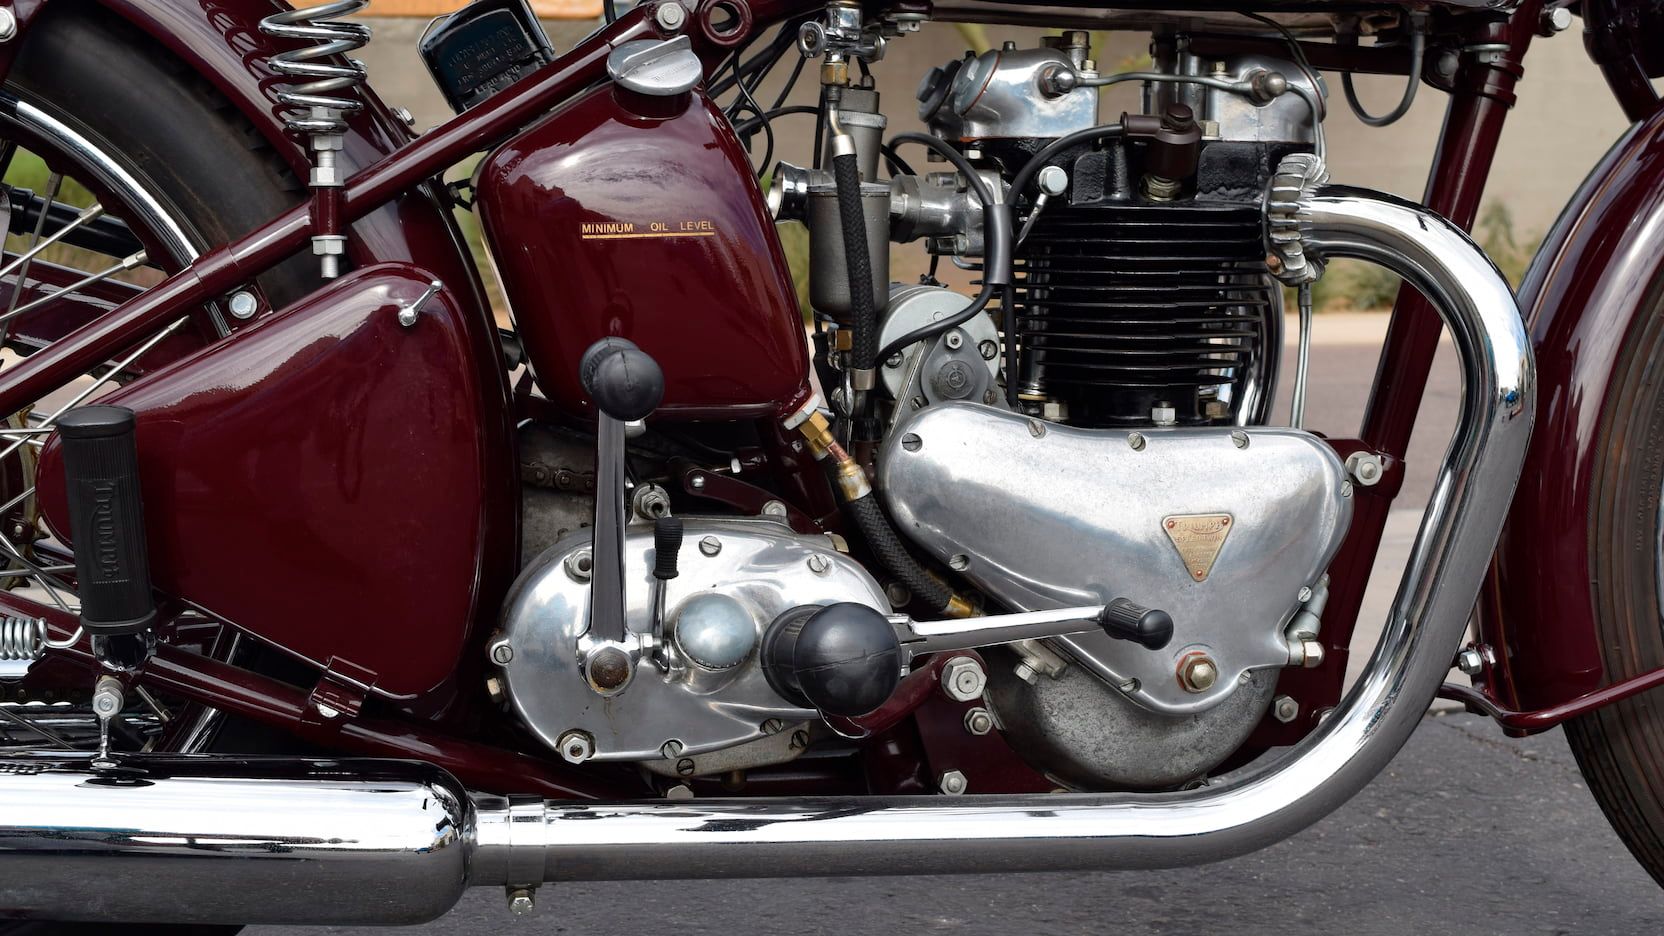 Engine of the Triumph Speed Twin